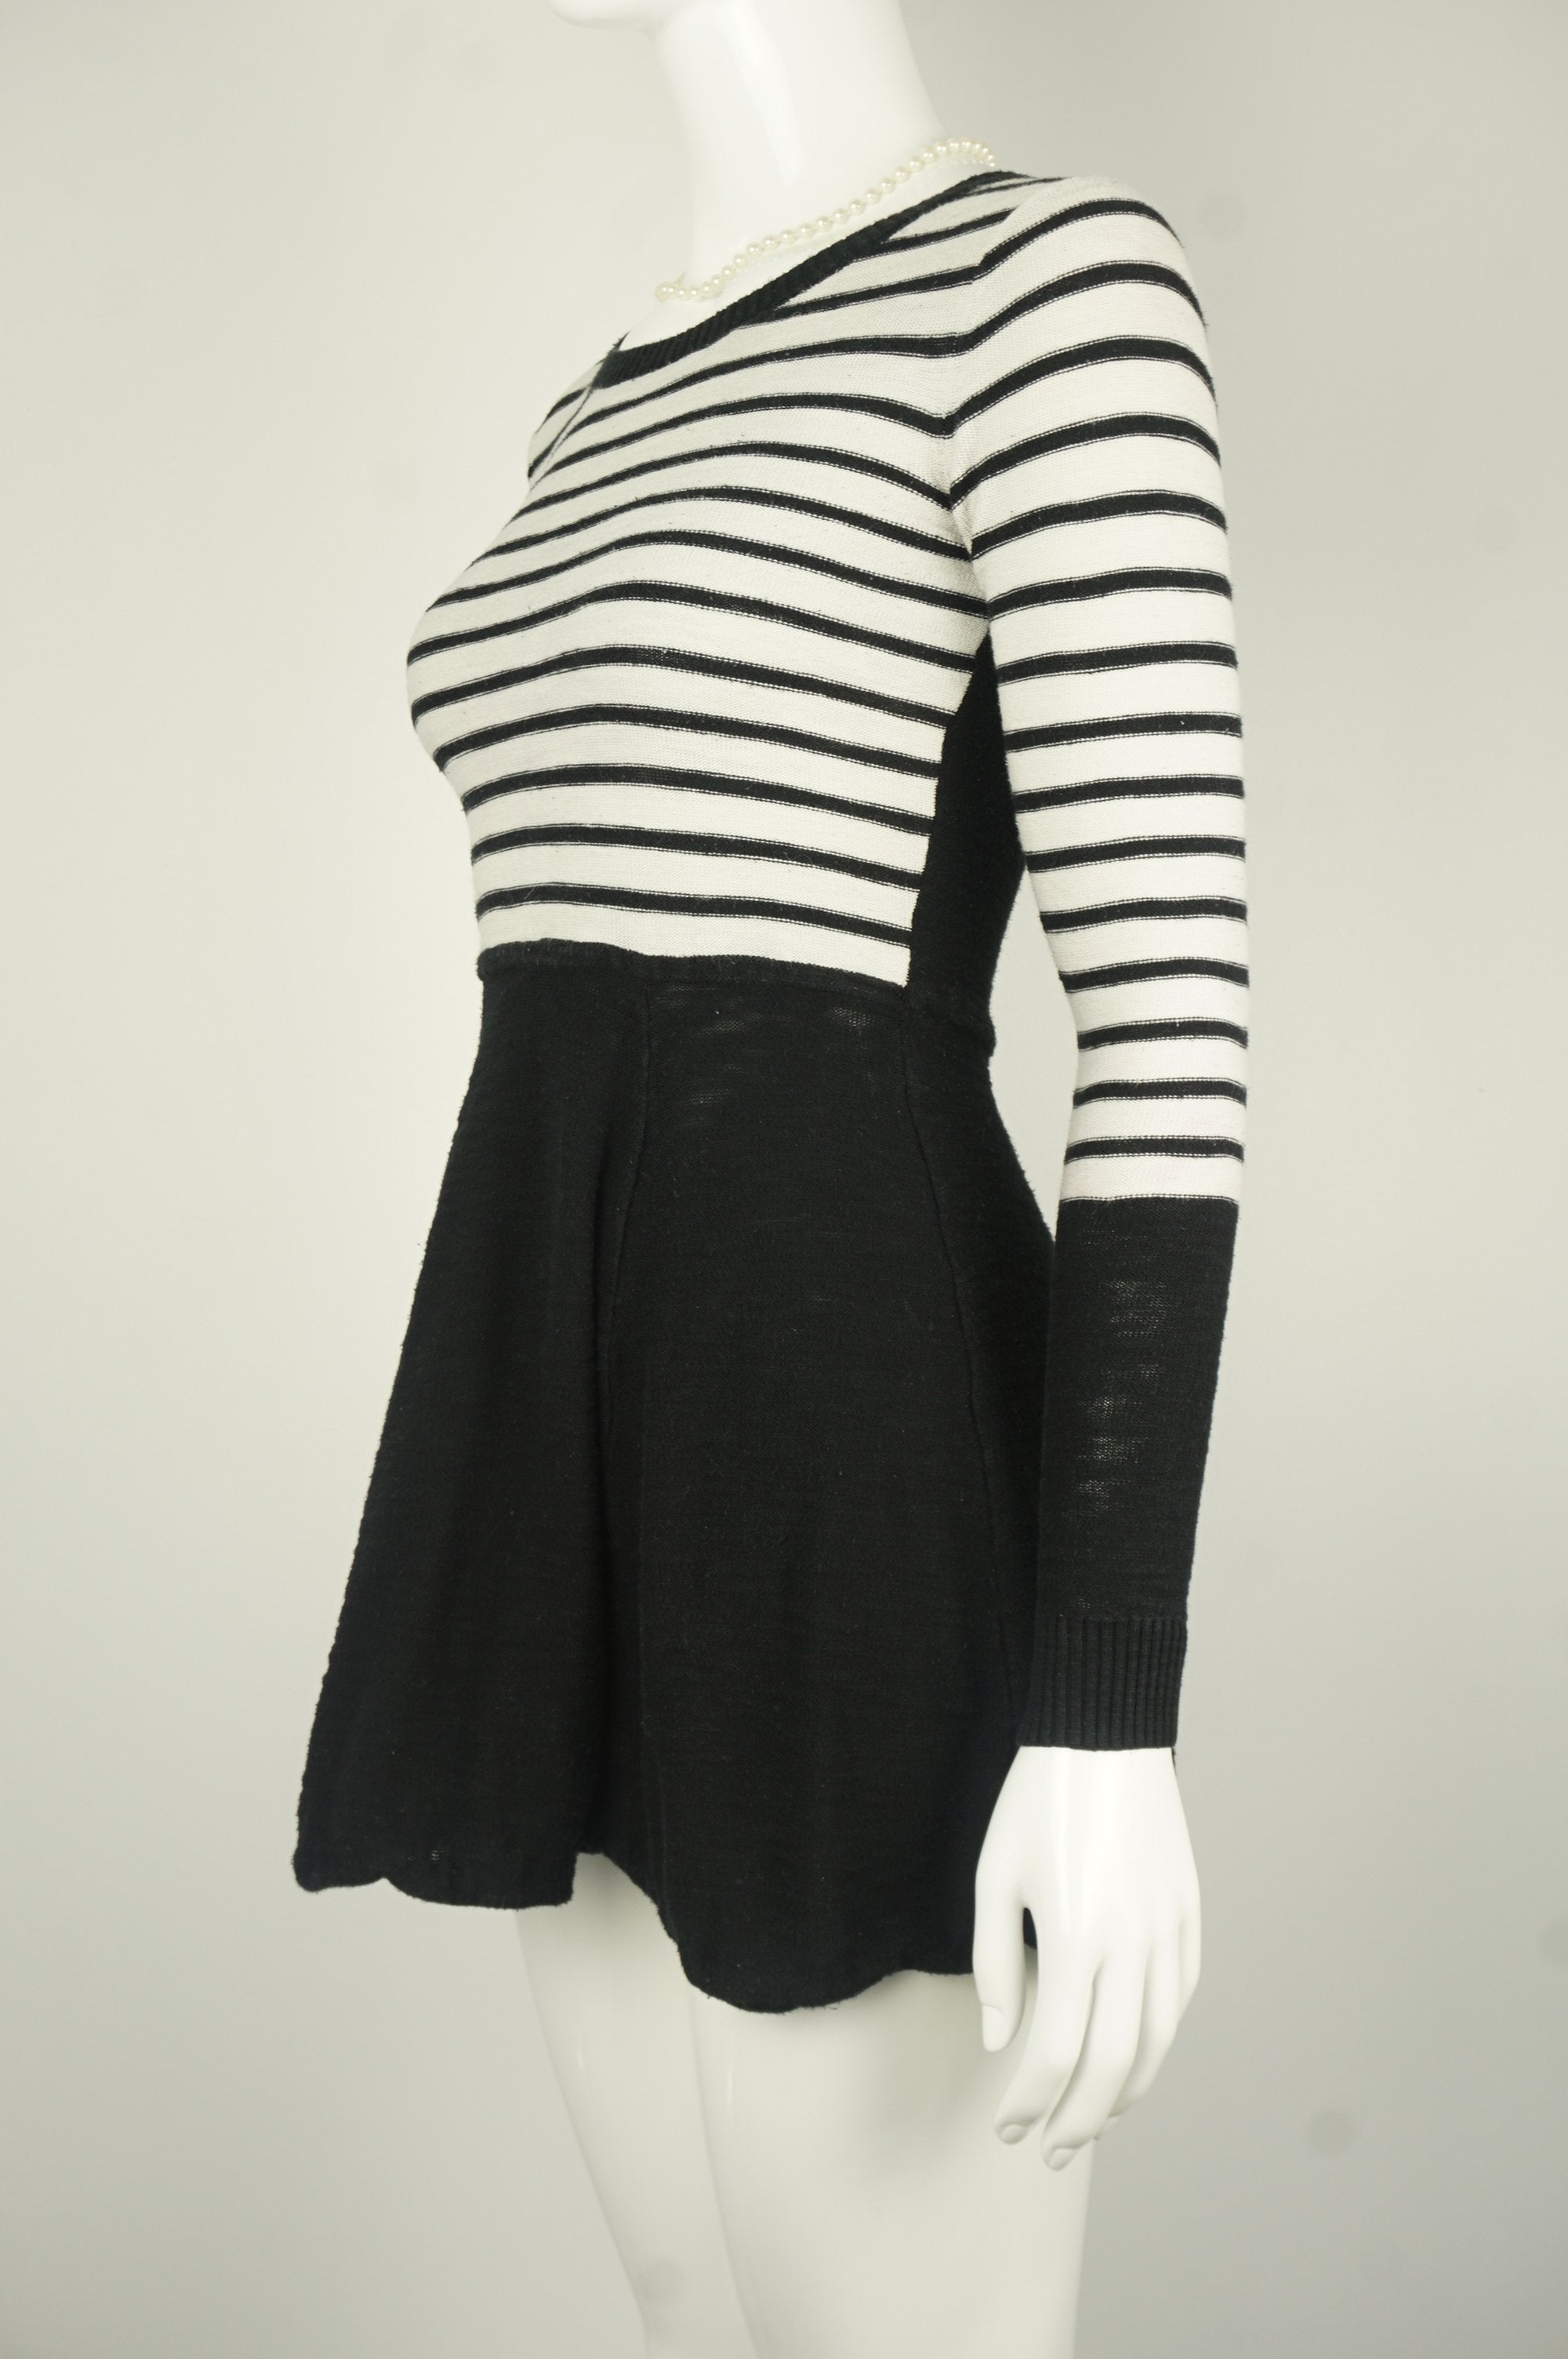 Express Zipper Back Black and White Striped Flare Dress with Long Sleeves, Stripes go with everything and they definitely work well with this black and white business casual winter dress. , Black, White, Warm and stretchy material, women's Dresses & Skirts, women's Black, White Dresses & Skirts, Express women's Dresses & Skirts, Black and White striped flare dress, long sleeves mini dress, warm winter dress